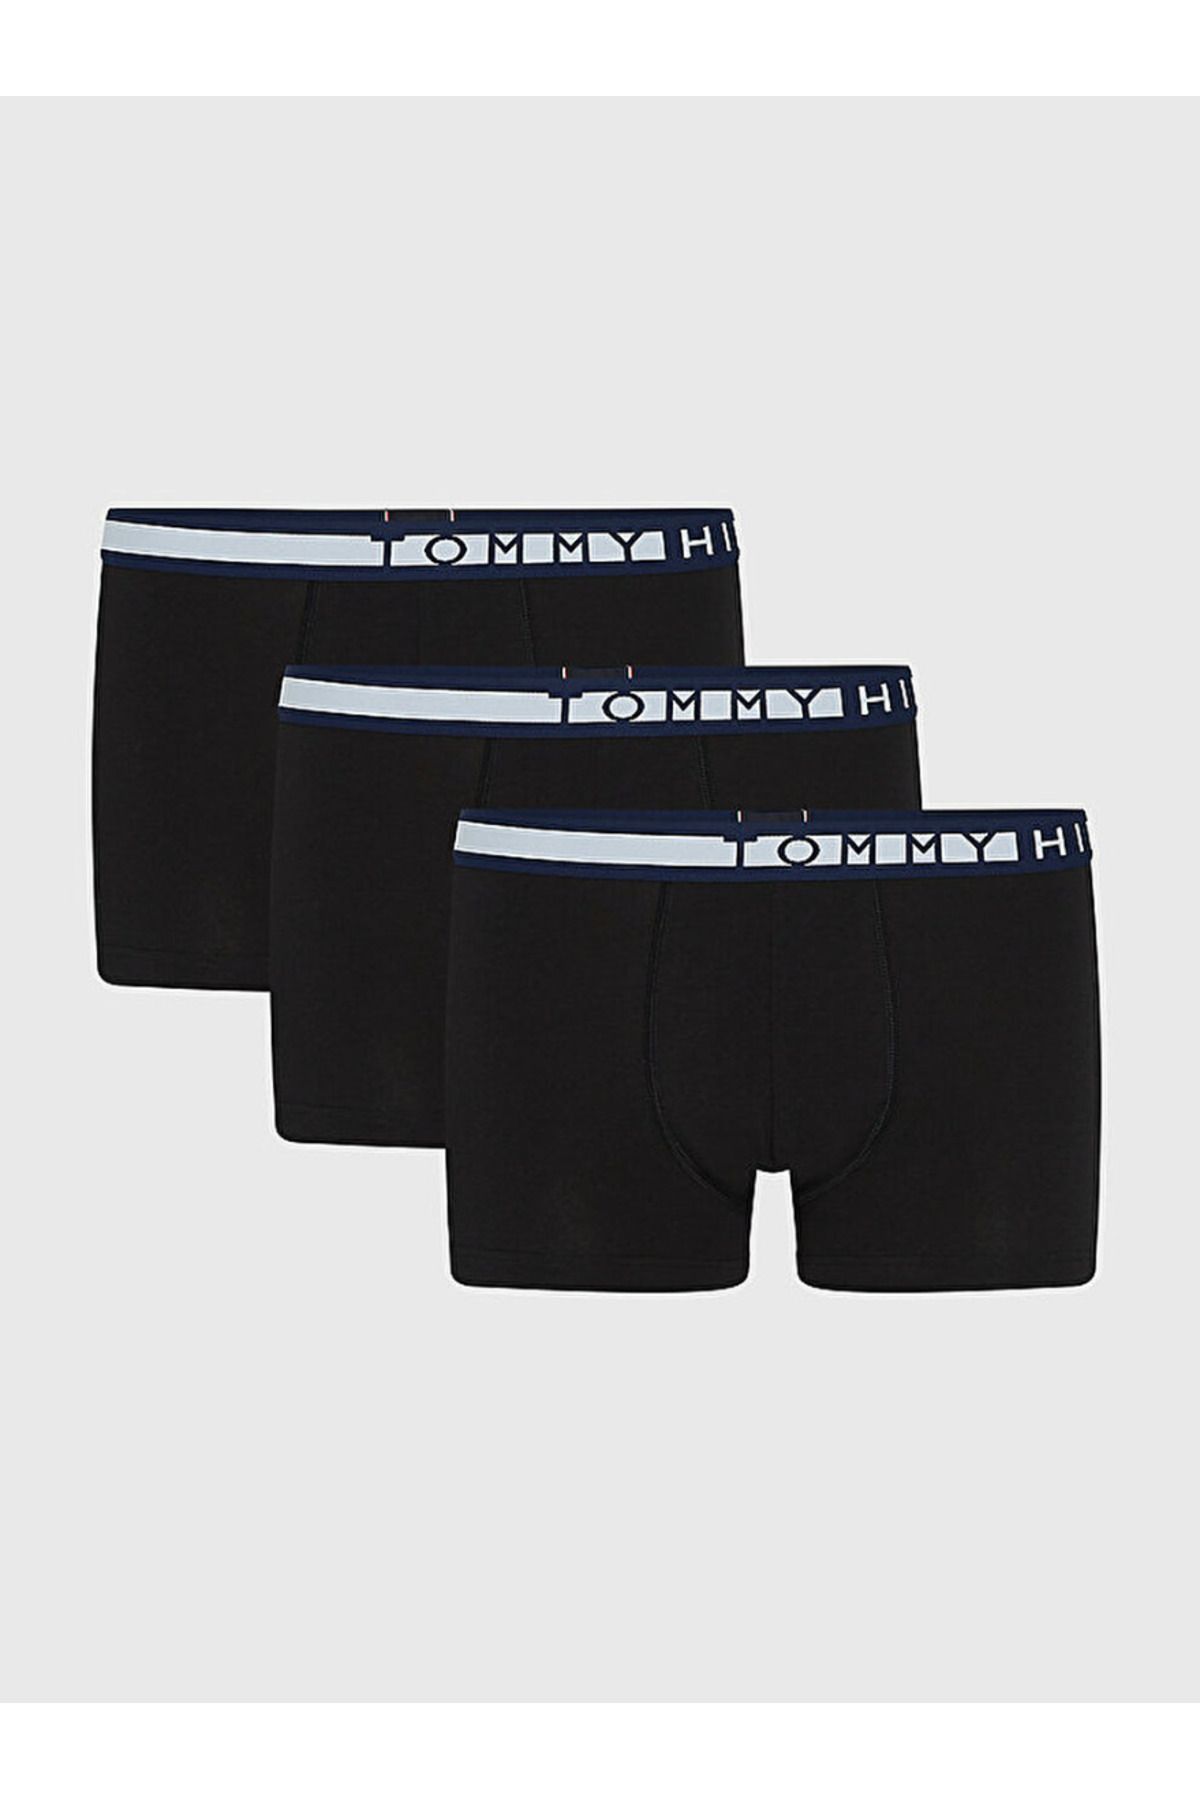 Tommy Hilfiger Pack of 3 boxers